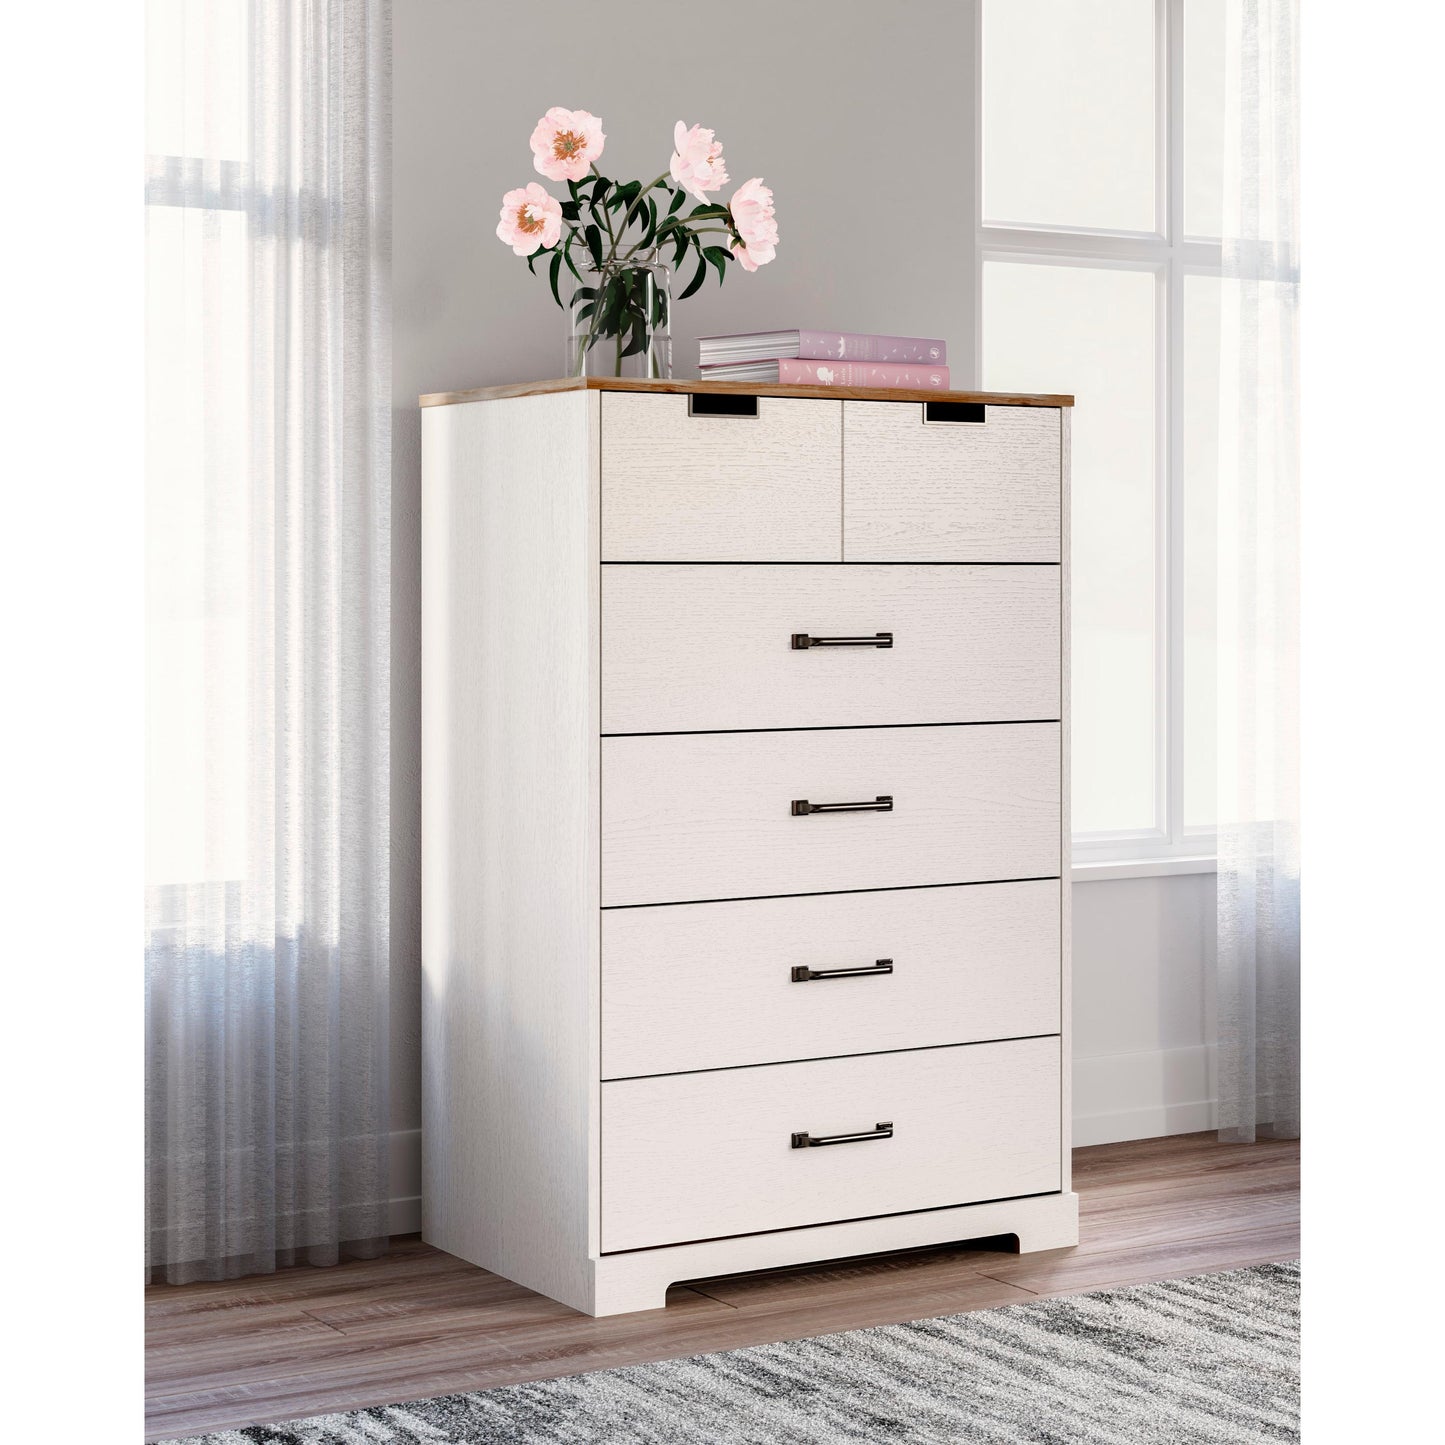 Signature Design by Ashley Kids Chests 5 Drawers EB1428-245 IMAGE 6